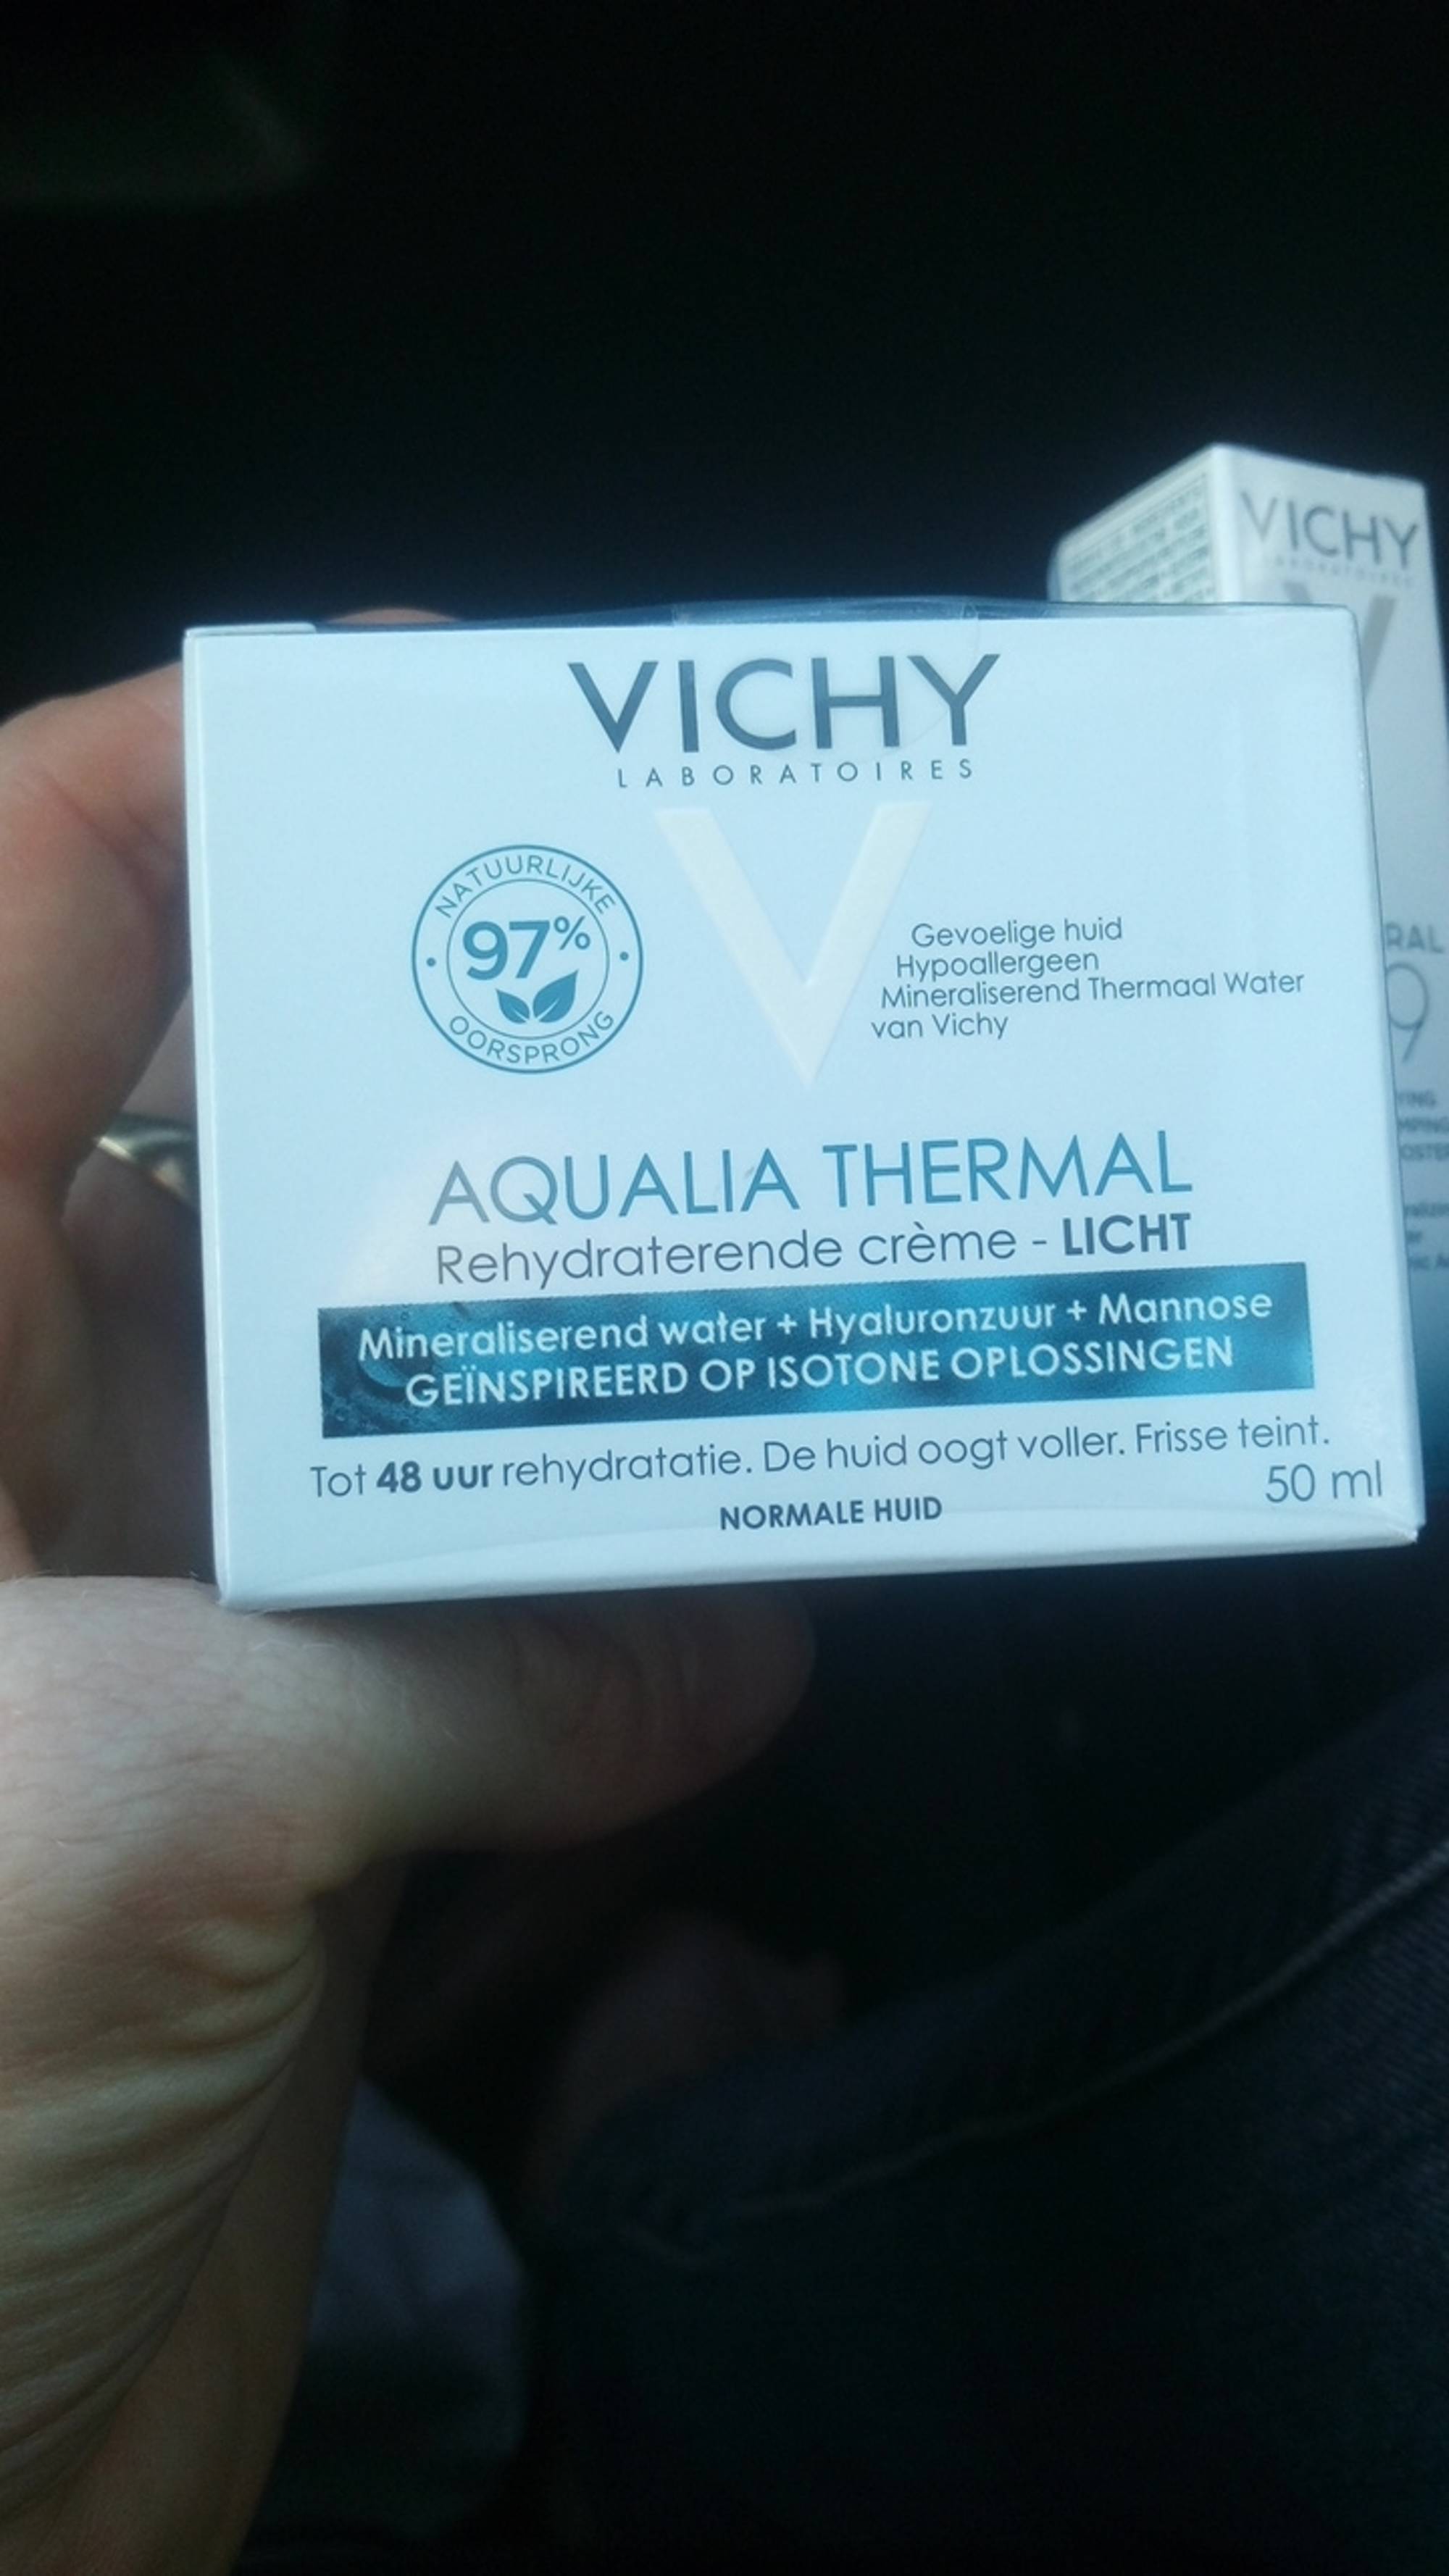 VICHY - Aqualia thermal - Rehydraterende crème - Licht